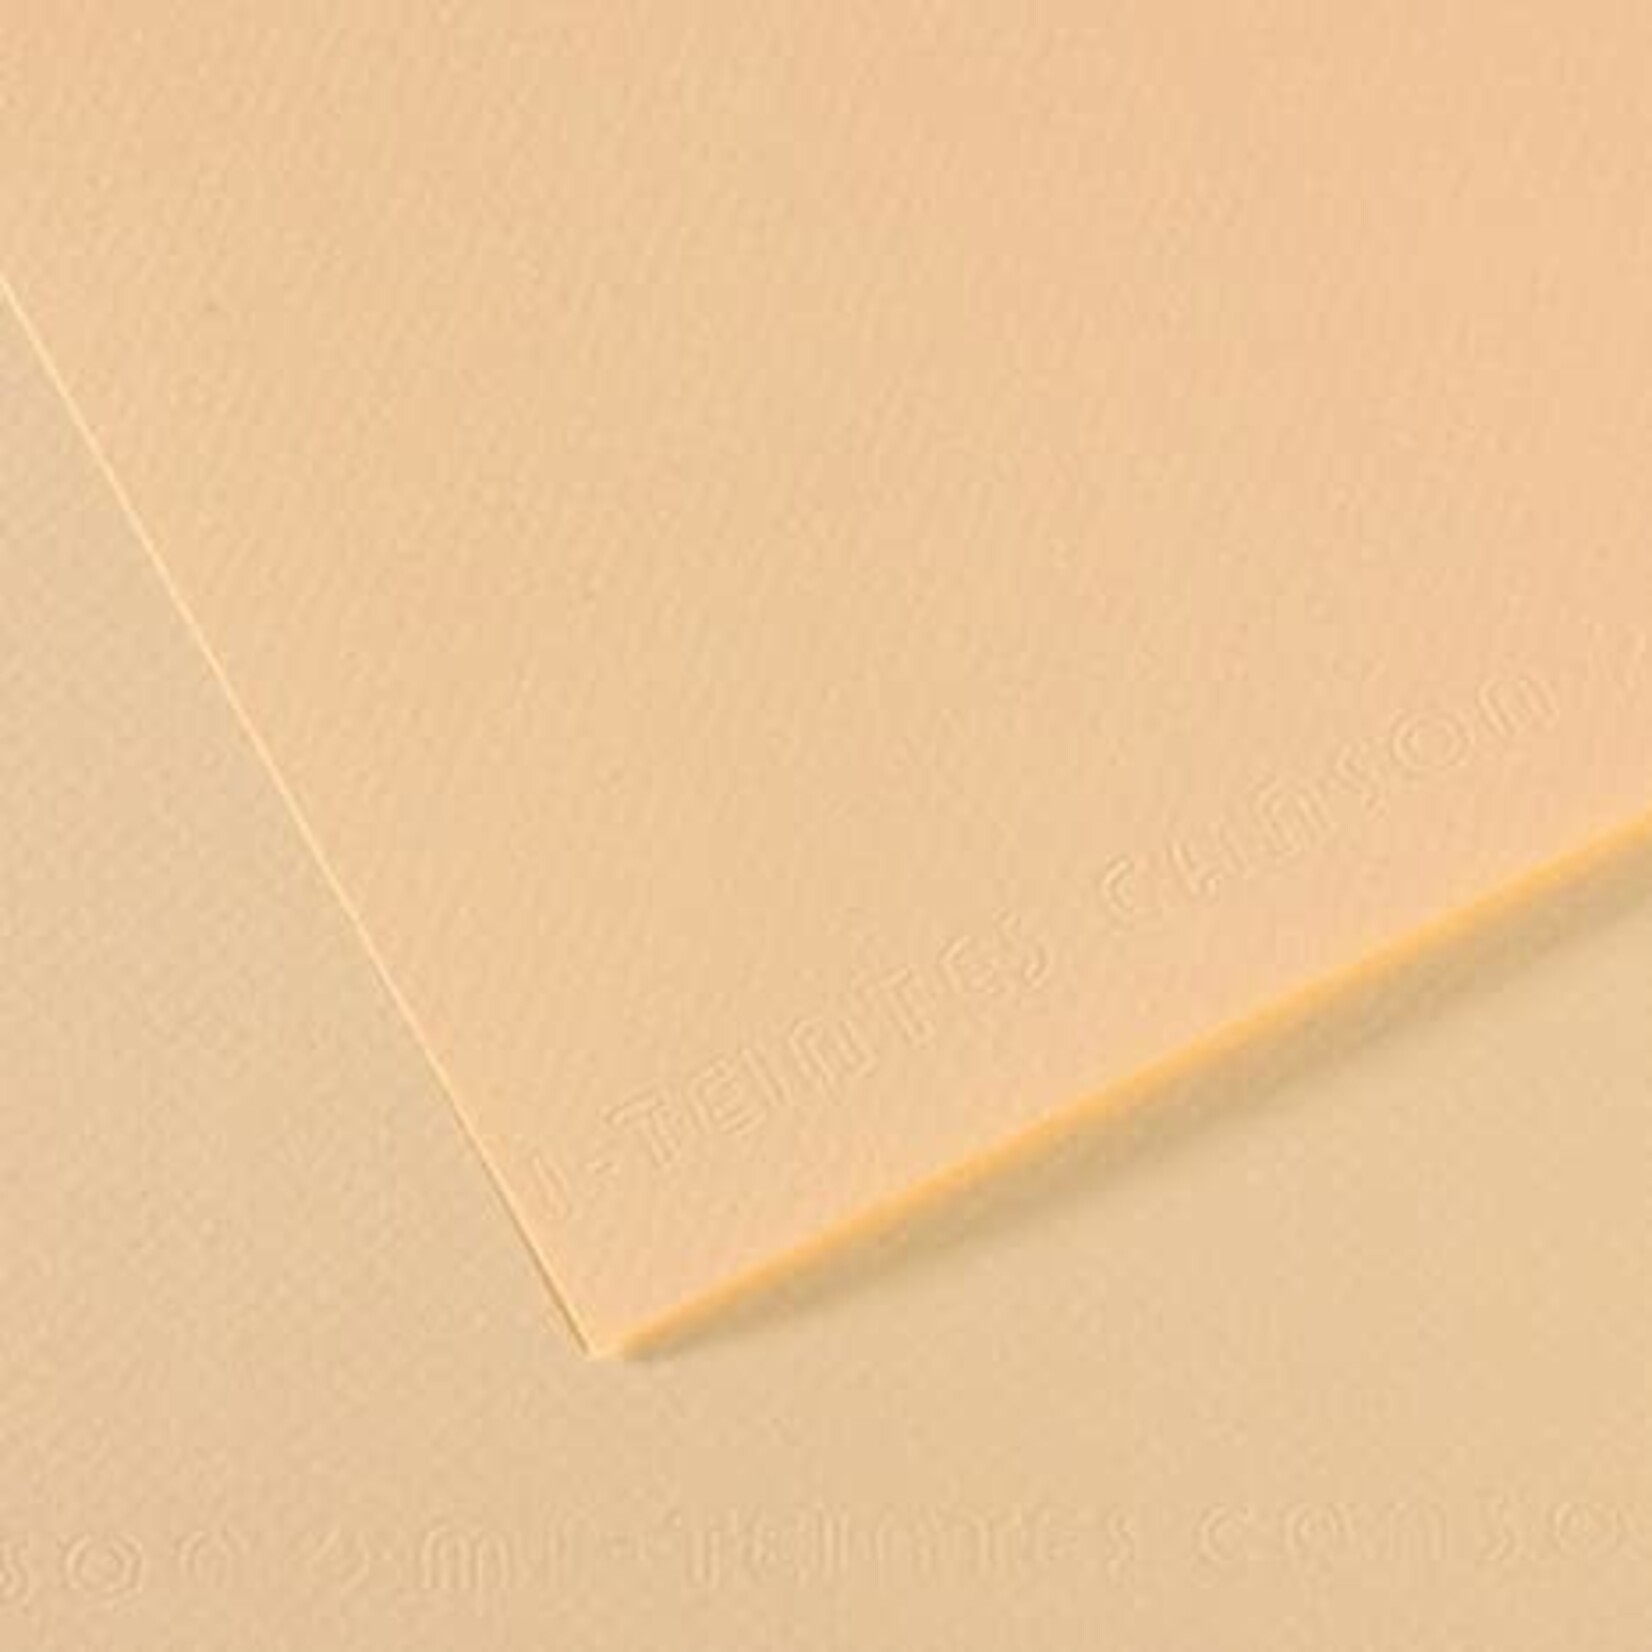 Canson Mi-Teintes Paper Sheets, 19'' x 25'', Ivory